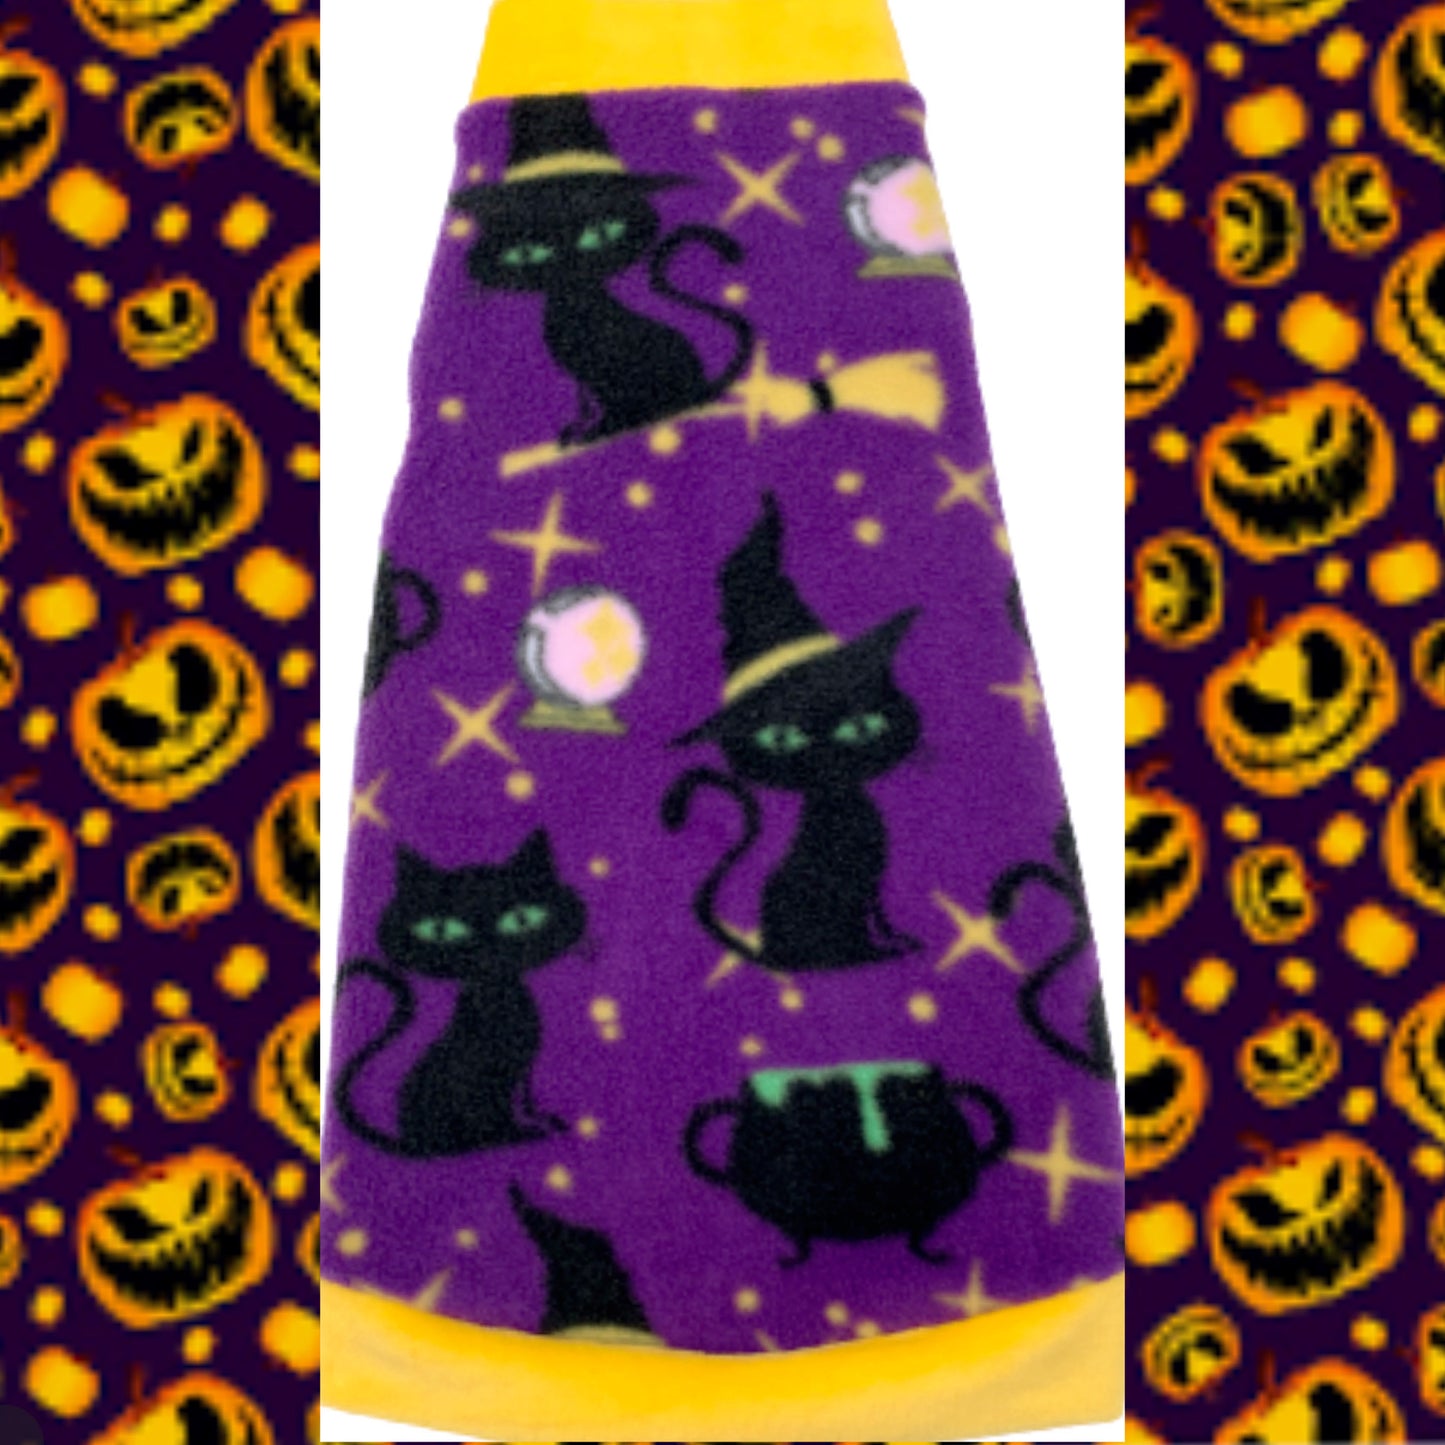 Black Cats on Purple Fleece "Witchy Kitty"